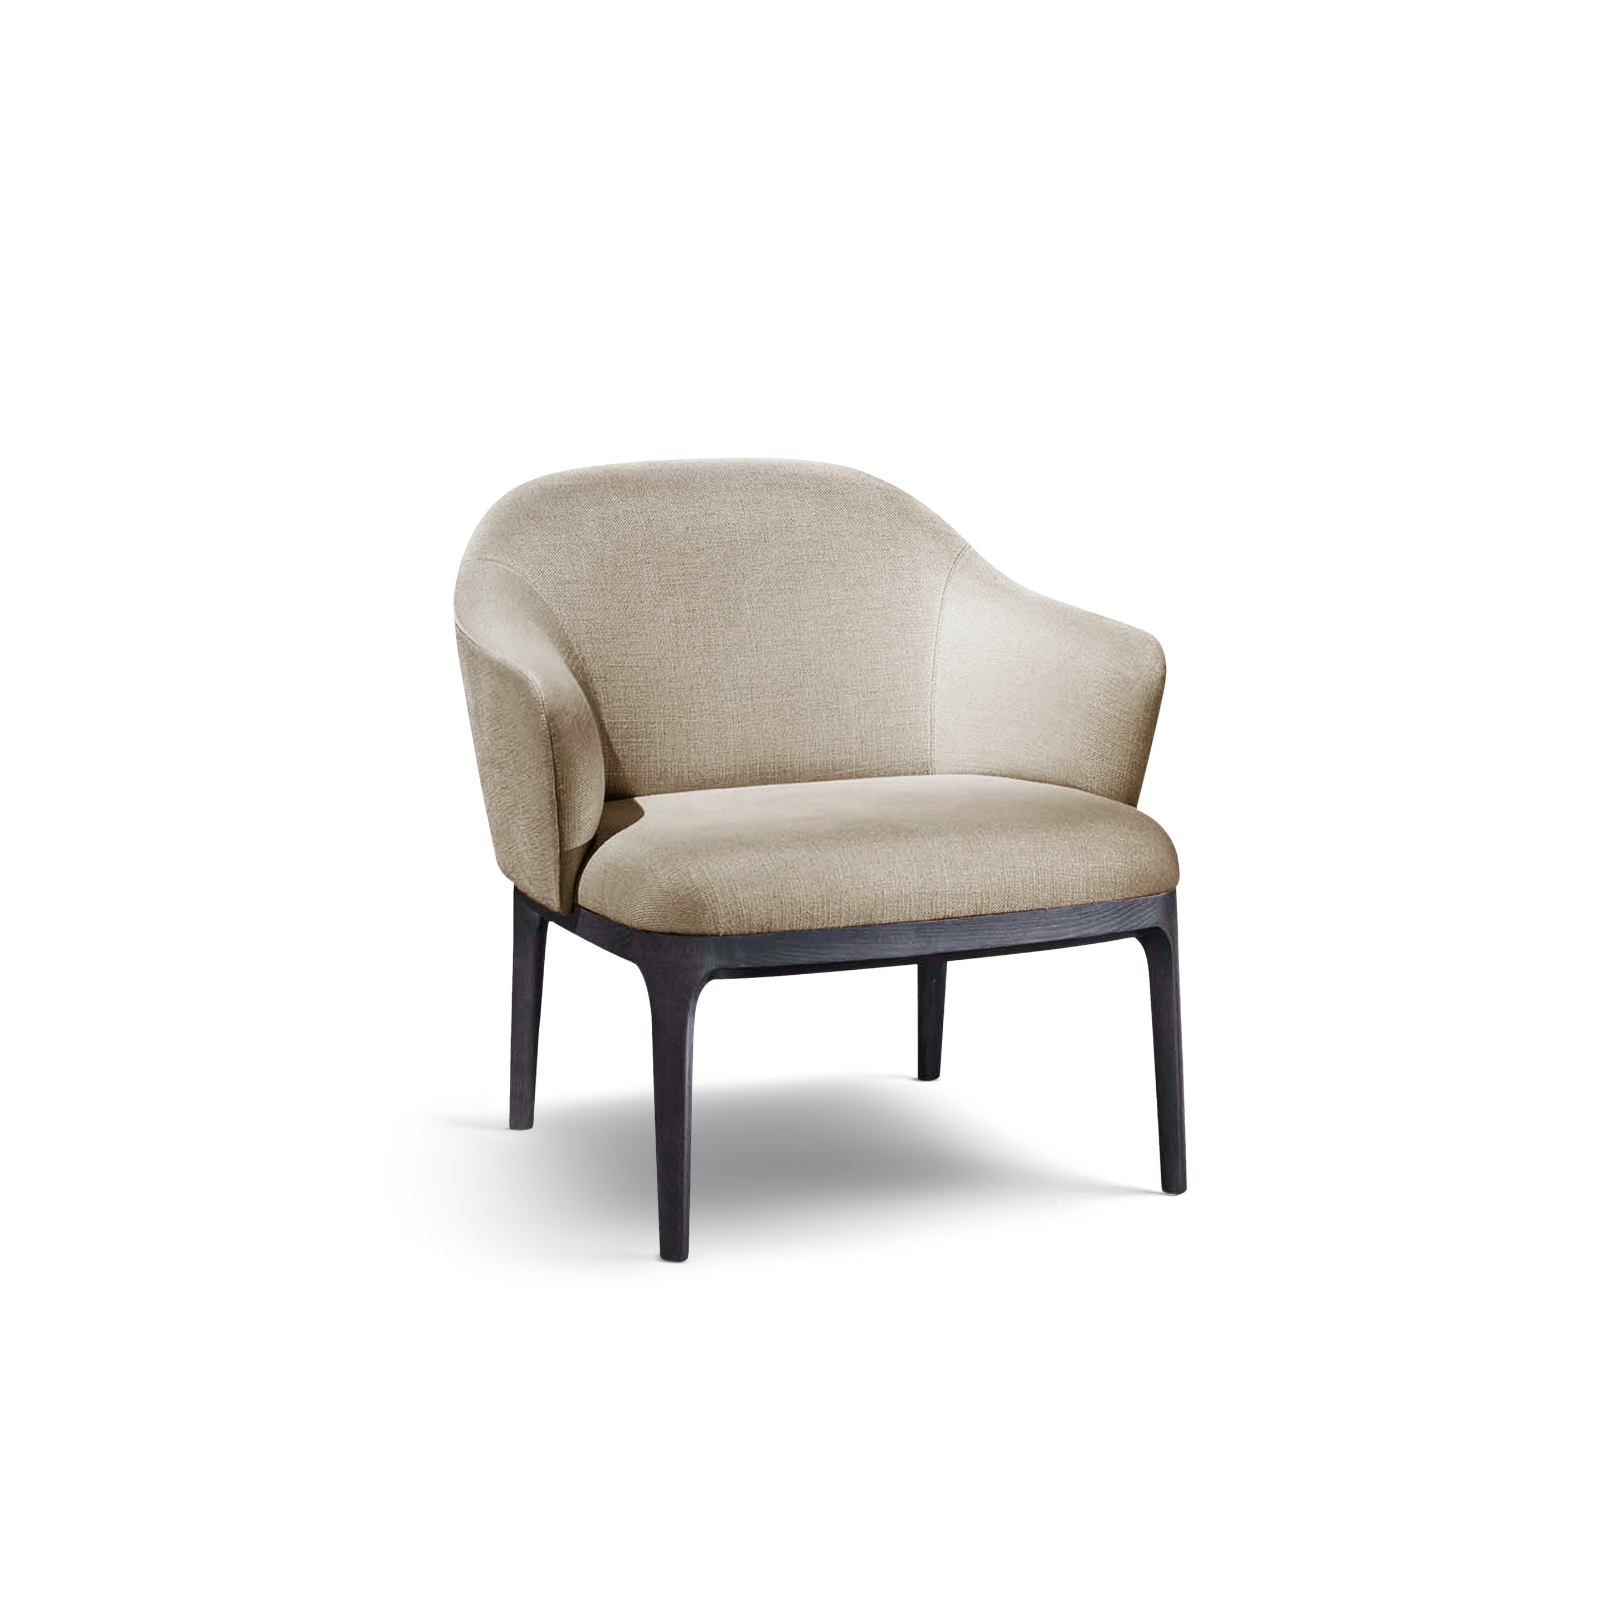 Manda XL lounge armchair is characterized by the measured proportions and delicate shape that confers a researched and elegant aesthetic.